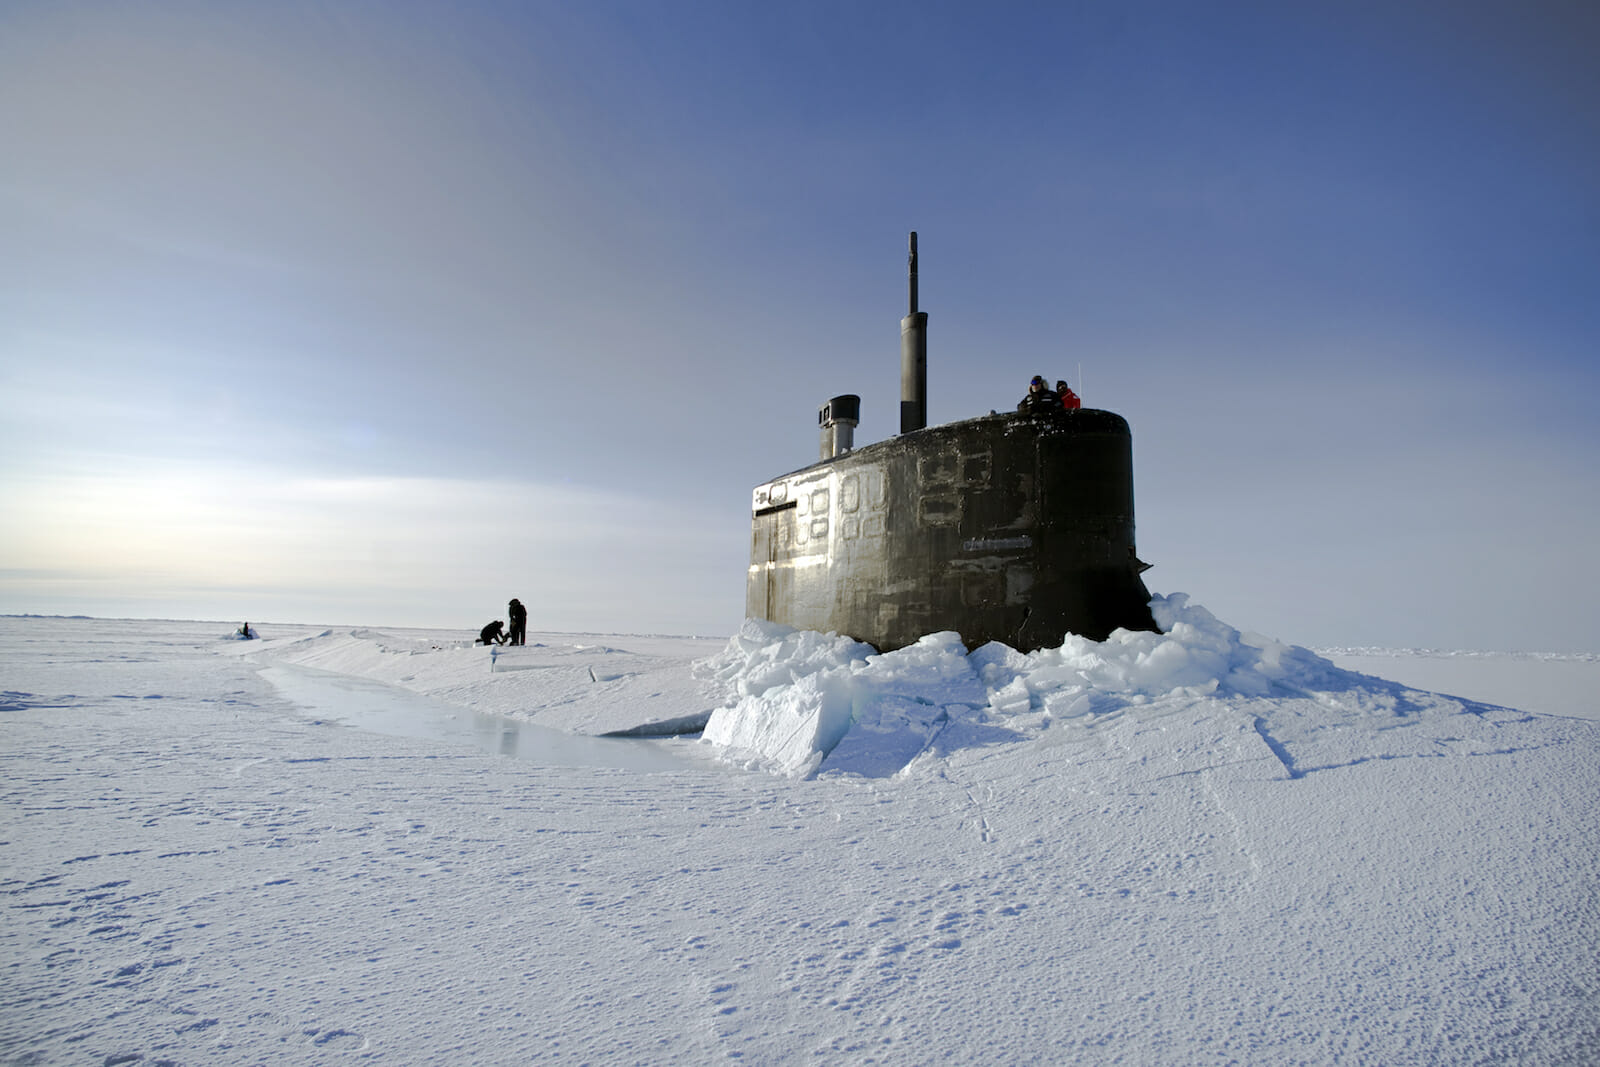 USS Connecticut breaking through the ice